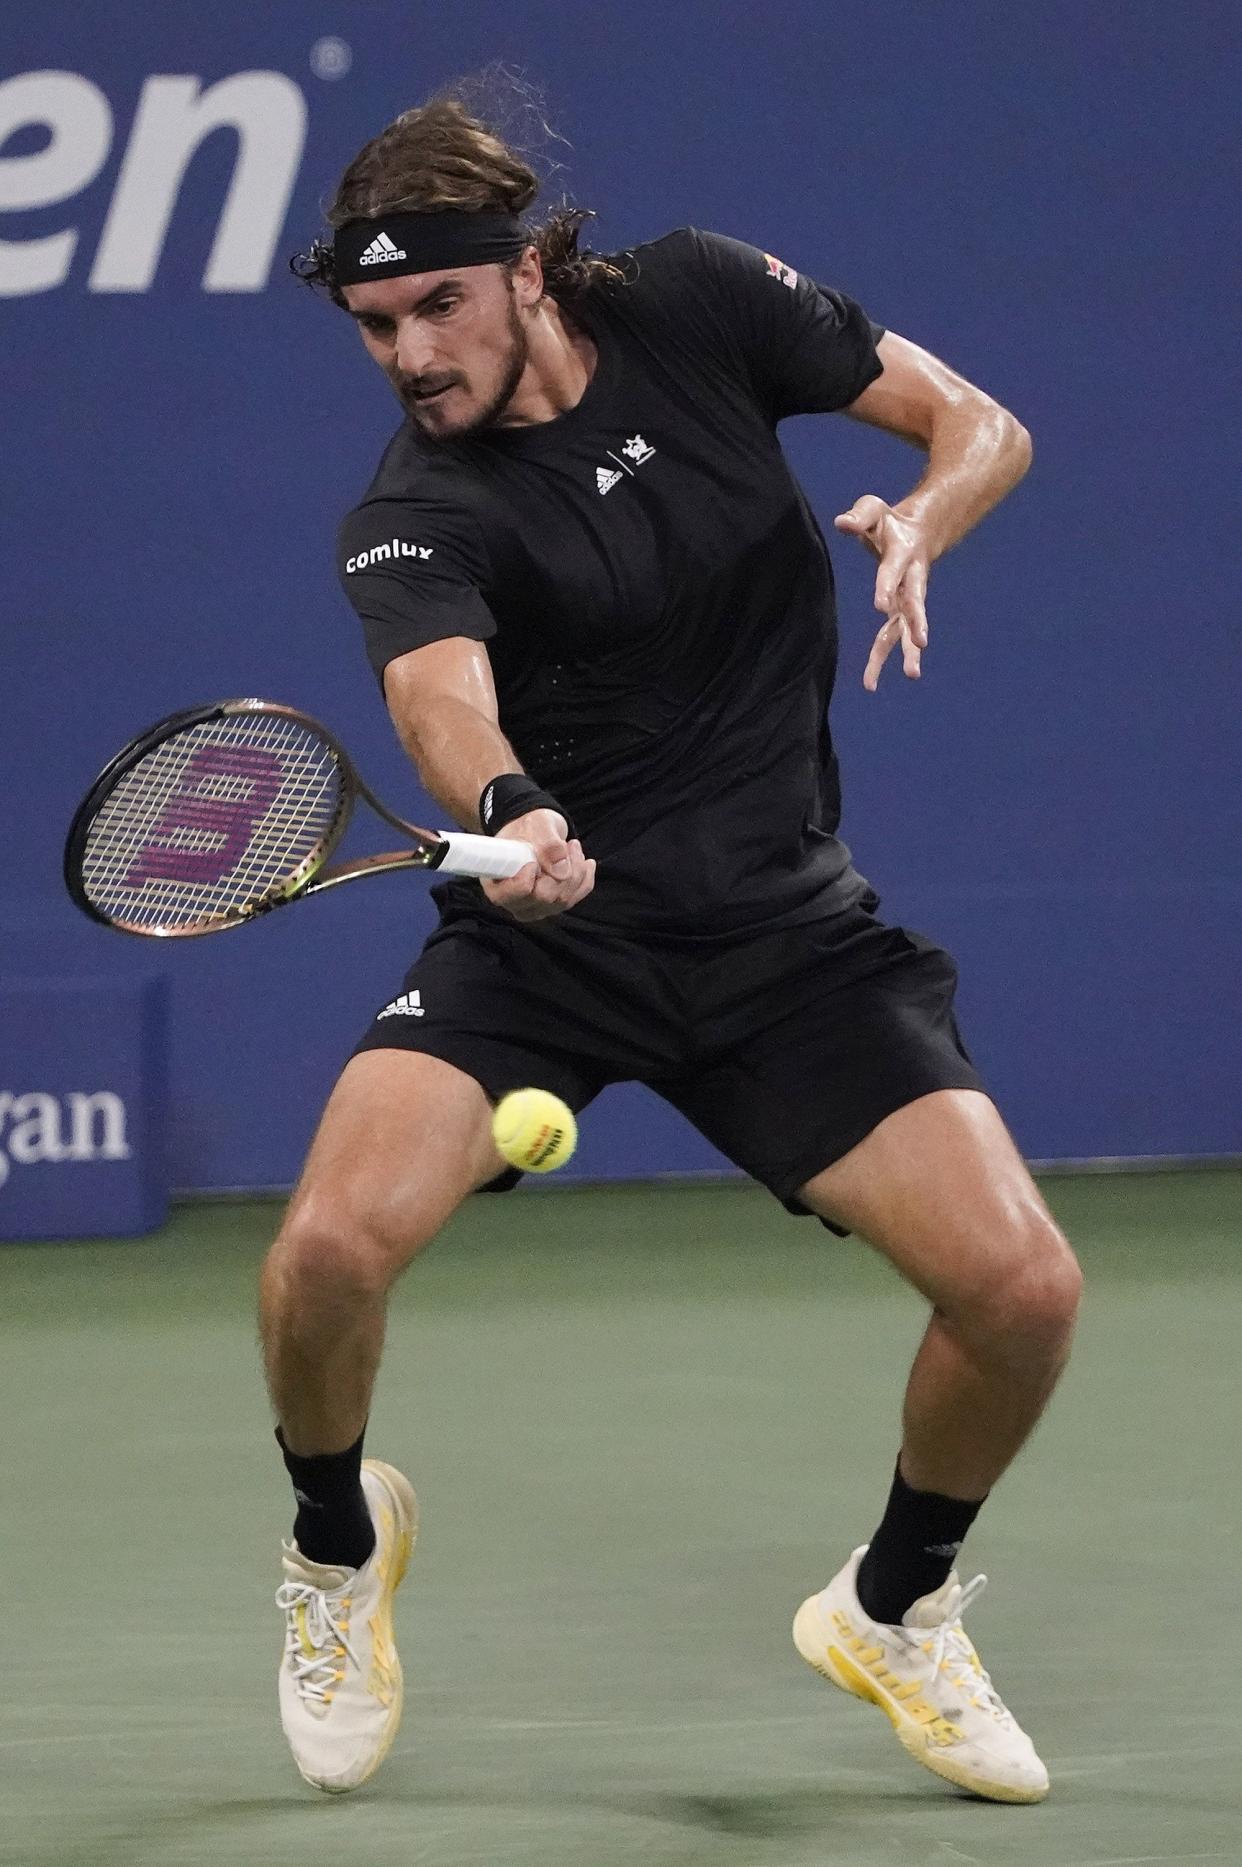 Stefanos Tsitsipas, of Greece, returns a shot to Daniel Elahi Galan, of Colombia, during the first round of the U.S. Open tennis championship on Monday, Aug. 29, 2022, in New York.